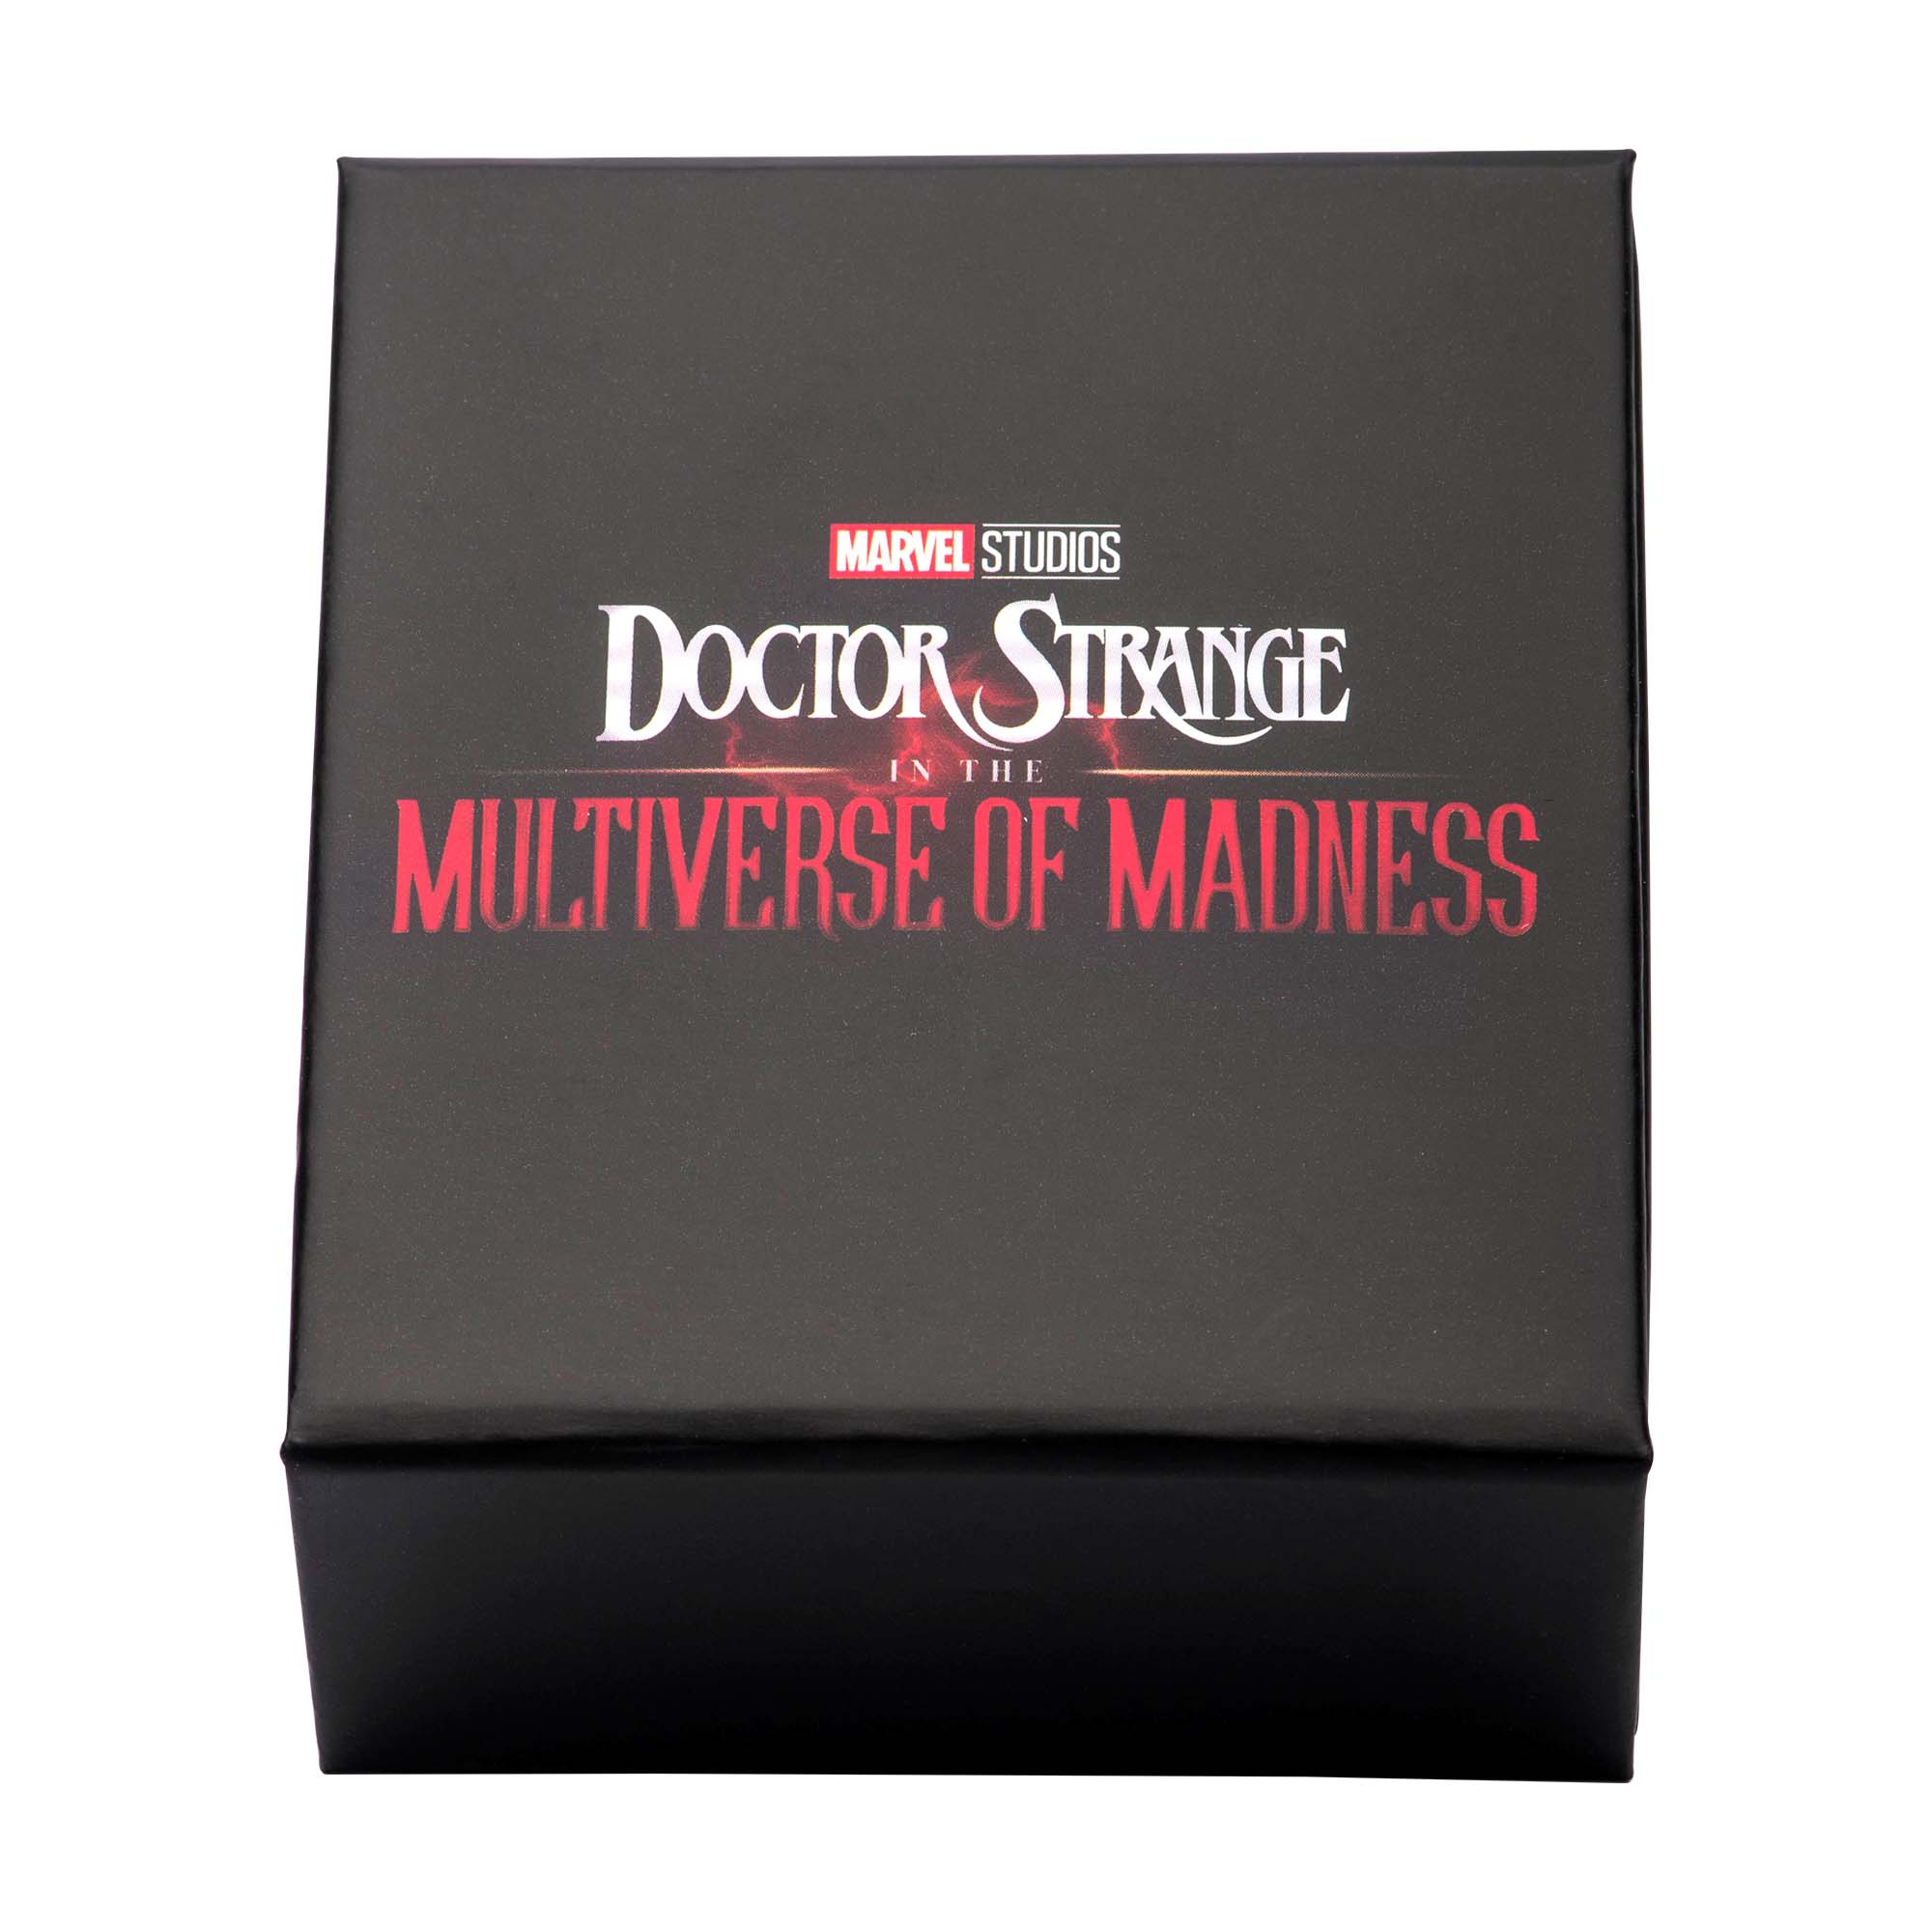 Marvel's Doctor Strange in the Multiverse of Madness Eye of Agamotto Pendant on Chain